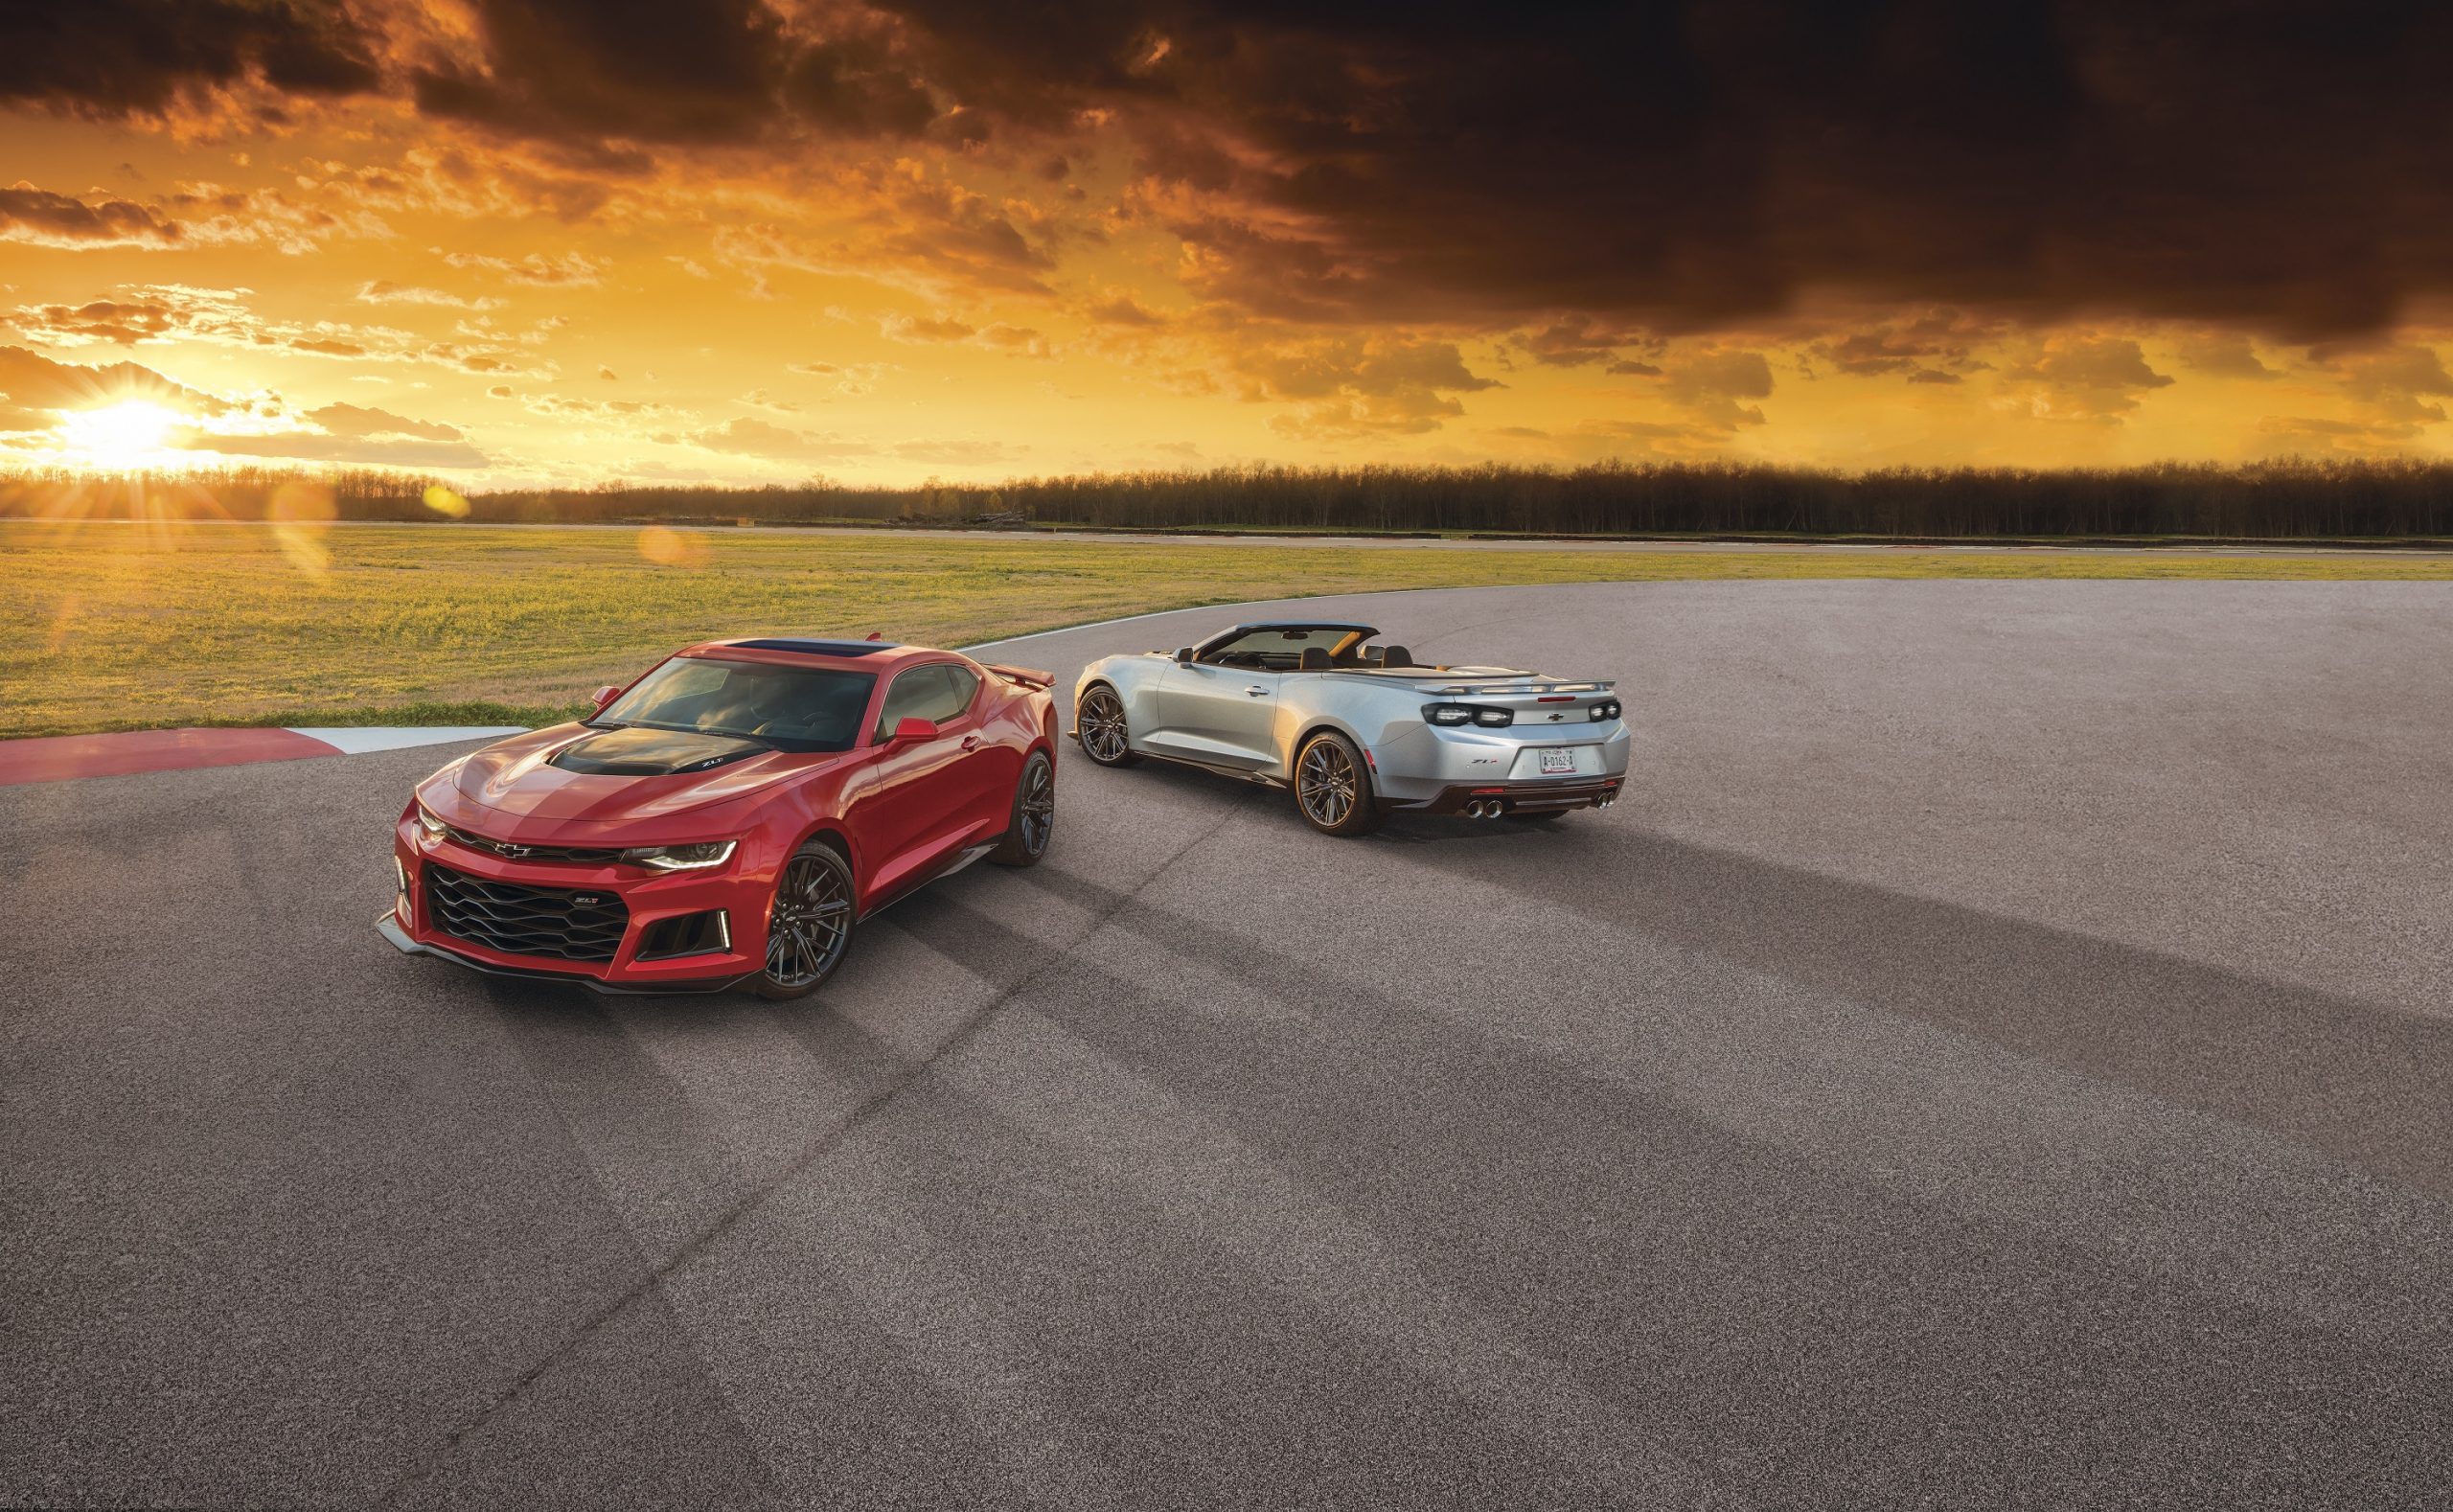 A red 2021 Chevrolet Camaro ZL1 coupe and convertible at sunset